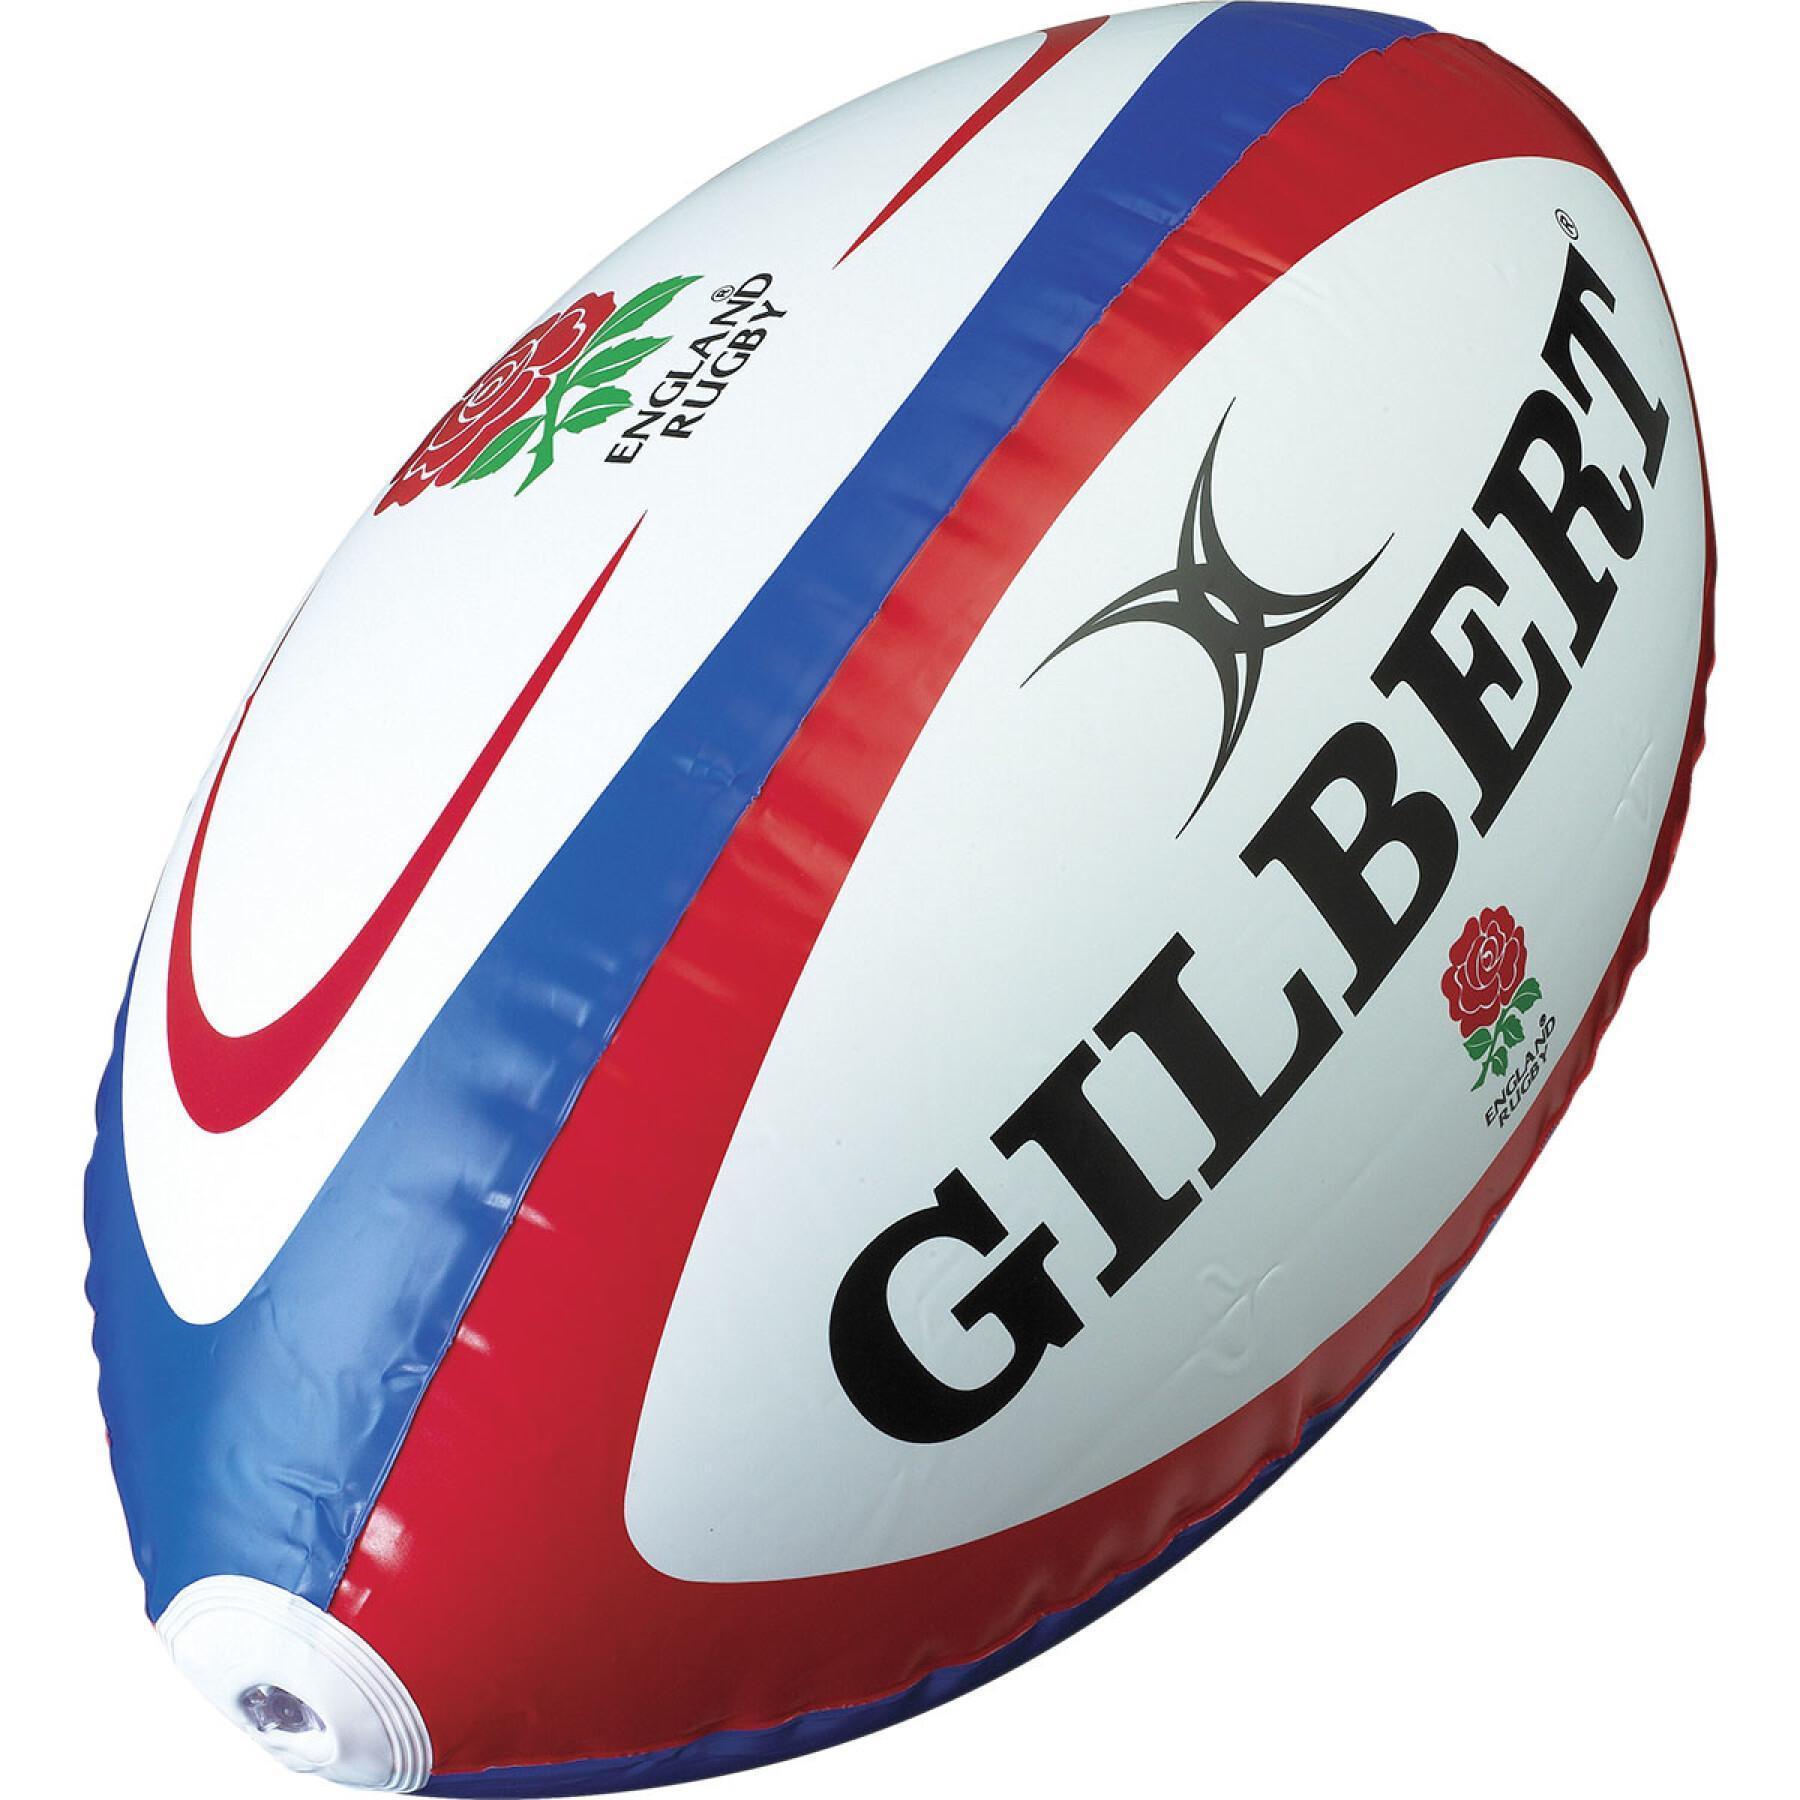 Géant ballon de rugby gonflable Gilbert Angleterre (tu)